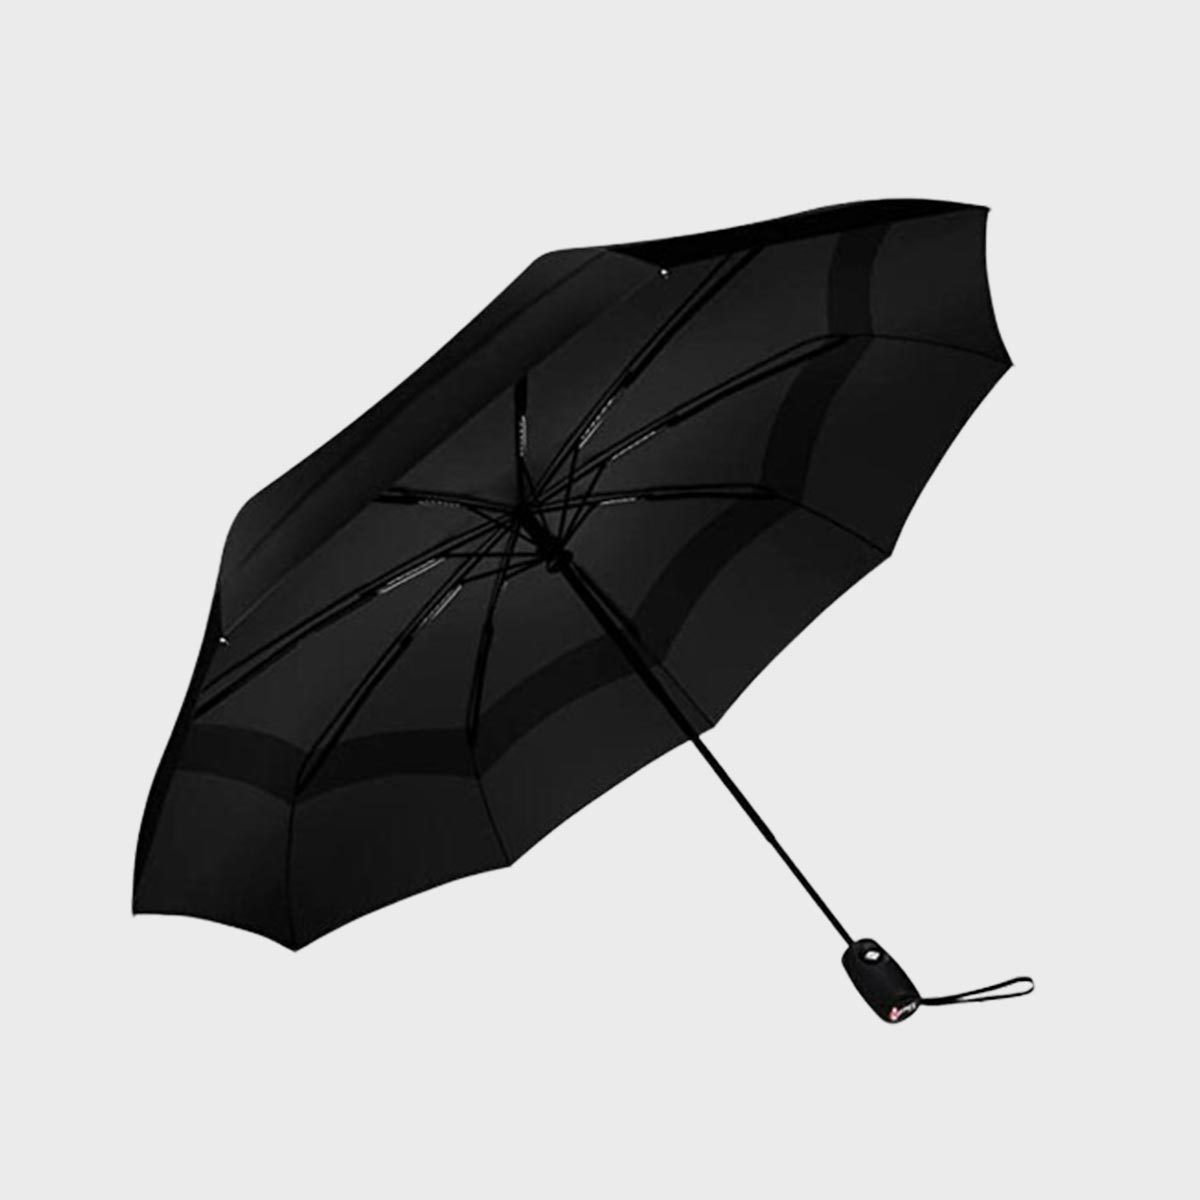 <p>When it comes to <a href="https://www.rd.com/list/packing-mistakes/">packing mistakes</a>, not bringing an umbrella is a common error. This <a href="https://www.amazon.com/Windproof-Travel-Umbrella-Rain-Compact/dp/B0160HYB8S/" rel="noopener noreferrer">windproof travel umbrella</a> folds down to such a small size that it even fits in a tiny travel day pack or <a href="https://www.rd.com/list/underseat-luggage/">underseat bag</a>. Weighing a mere 15 ounces, it's small but mighty. It expands to provide full coverage and sports reinforced fiberglass ribs to withstand intense weather conditions.</p> <p class="listicle-page__cta-button-shop"><a class="shop-btn" href="https://www.amazon.com/Windproof-Travel-Umbrella-Rain-Compact/dp/B0160HYB8S/">Shop Now</a></p>